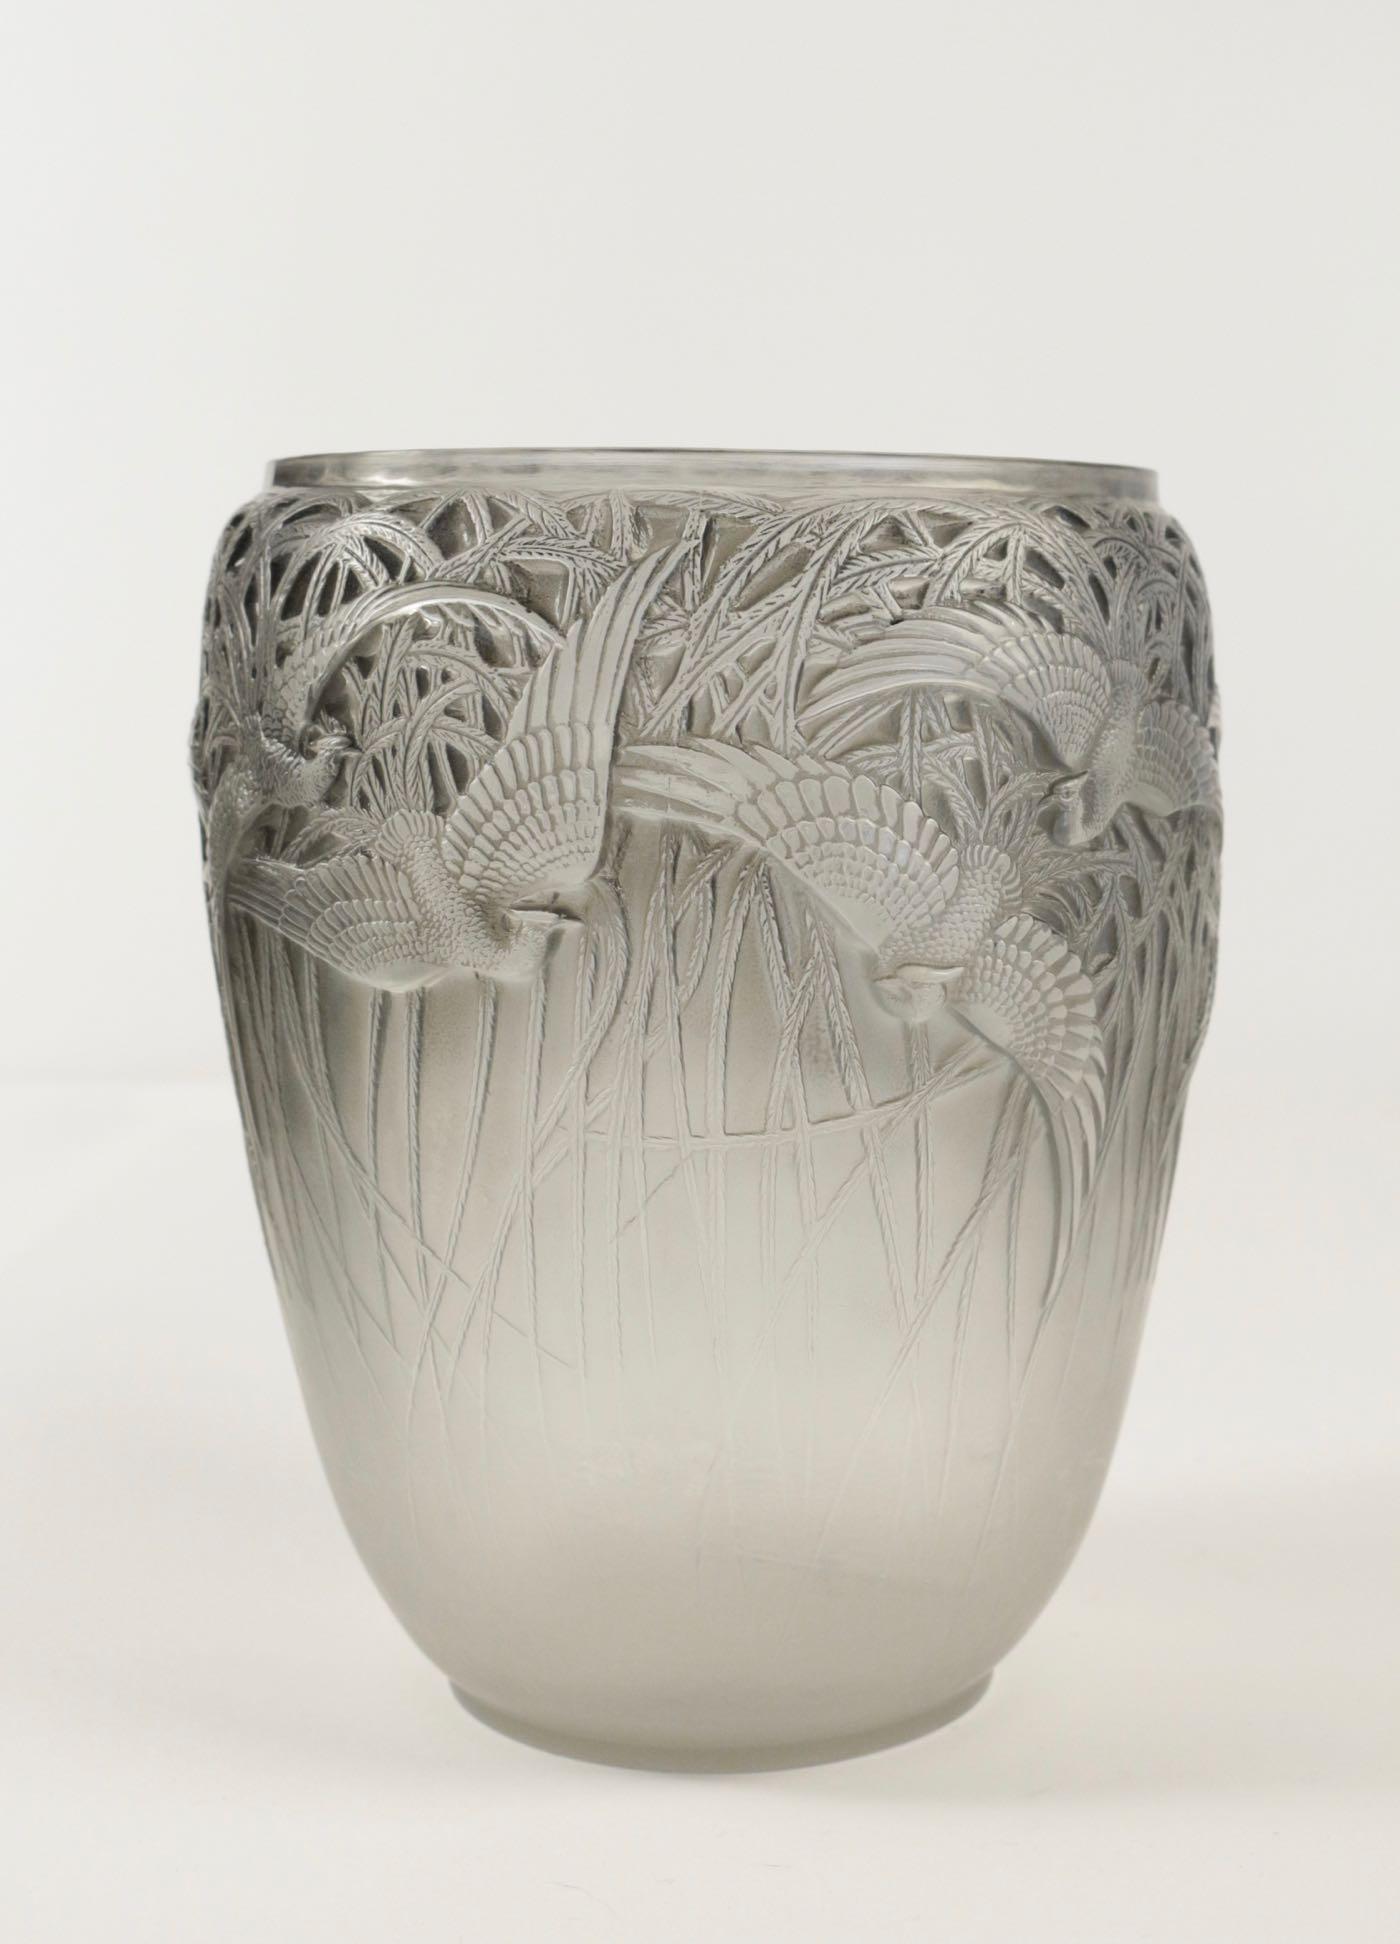 René Lalique (1860-1945)
Vase Aigrettes.
Measures: 8 and 1/2 inches high.
Mold pressed glass having a flying egrets against a tall reed style plants background all around the exterior.
Glass highlighted with blue grey patinated.

Model created